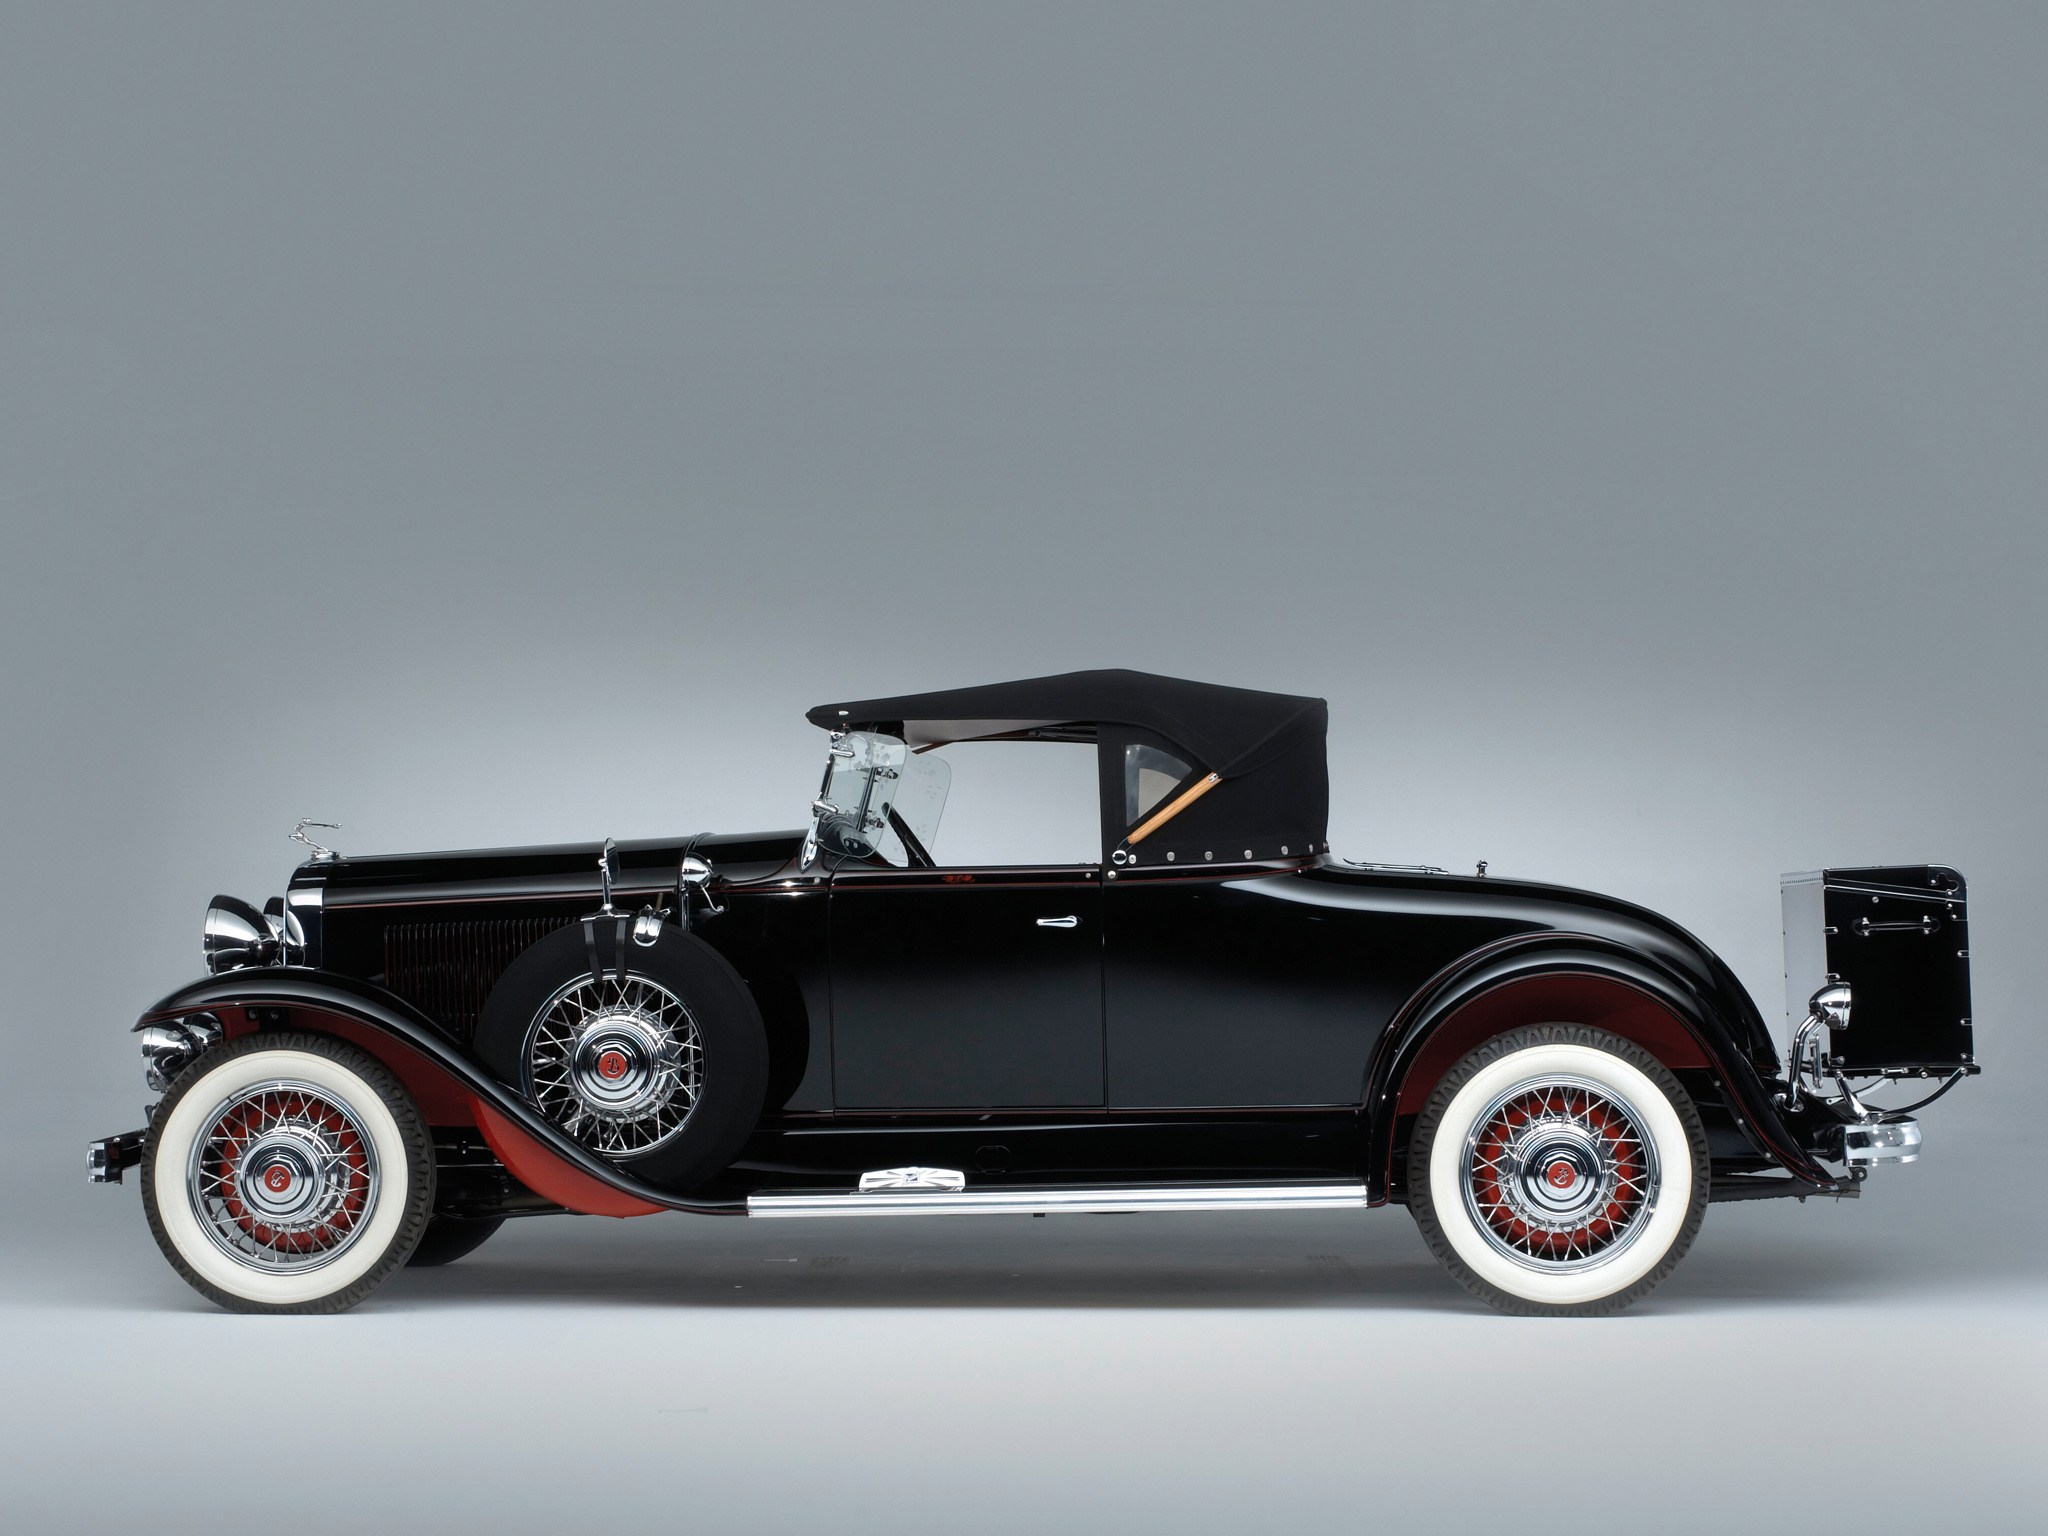 1931 Buick 94 Roadster Backgrounds, Compatible - PC, Mobile, Gadgets| 2048x1536 px